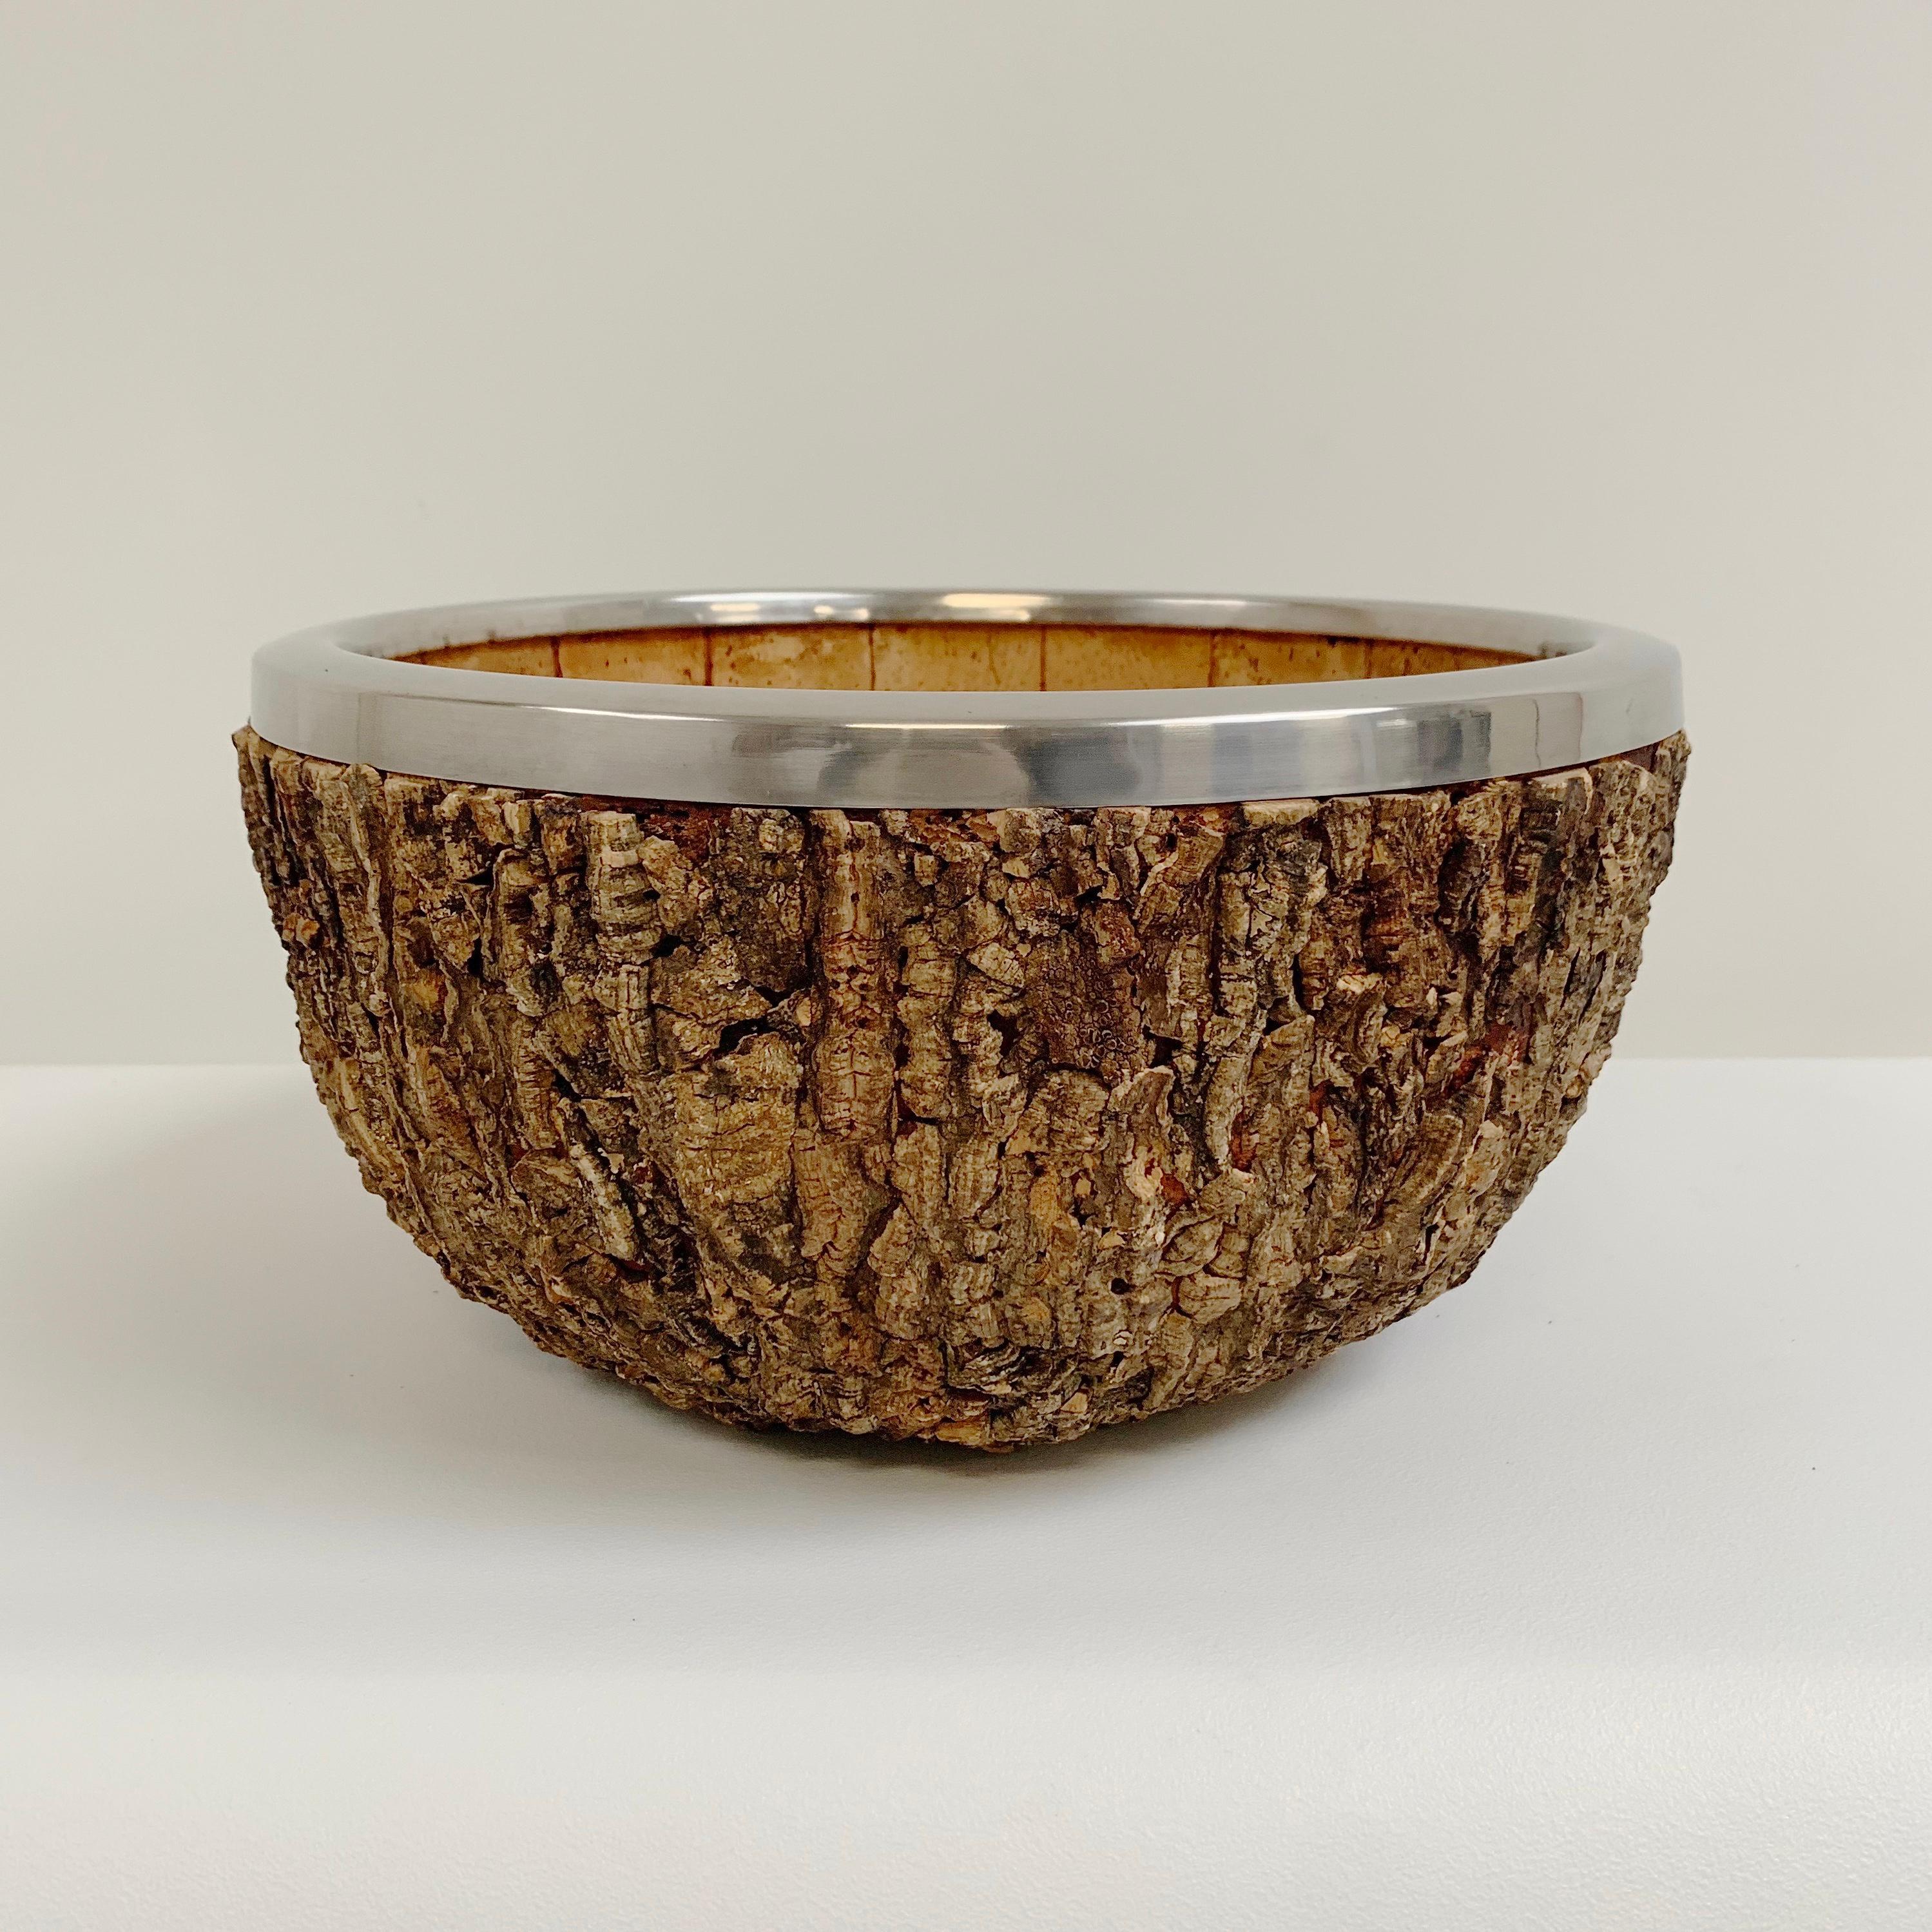 Nice Gabrielle Crespi Large Cork Bowl, circa 1974, Italy.
Rim signed with Gabriella Crespi marks.
Good original vintage condition, also inside.
A very decorative object for a center table.
All purchases are covered by our Buyer Protection